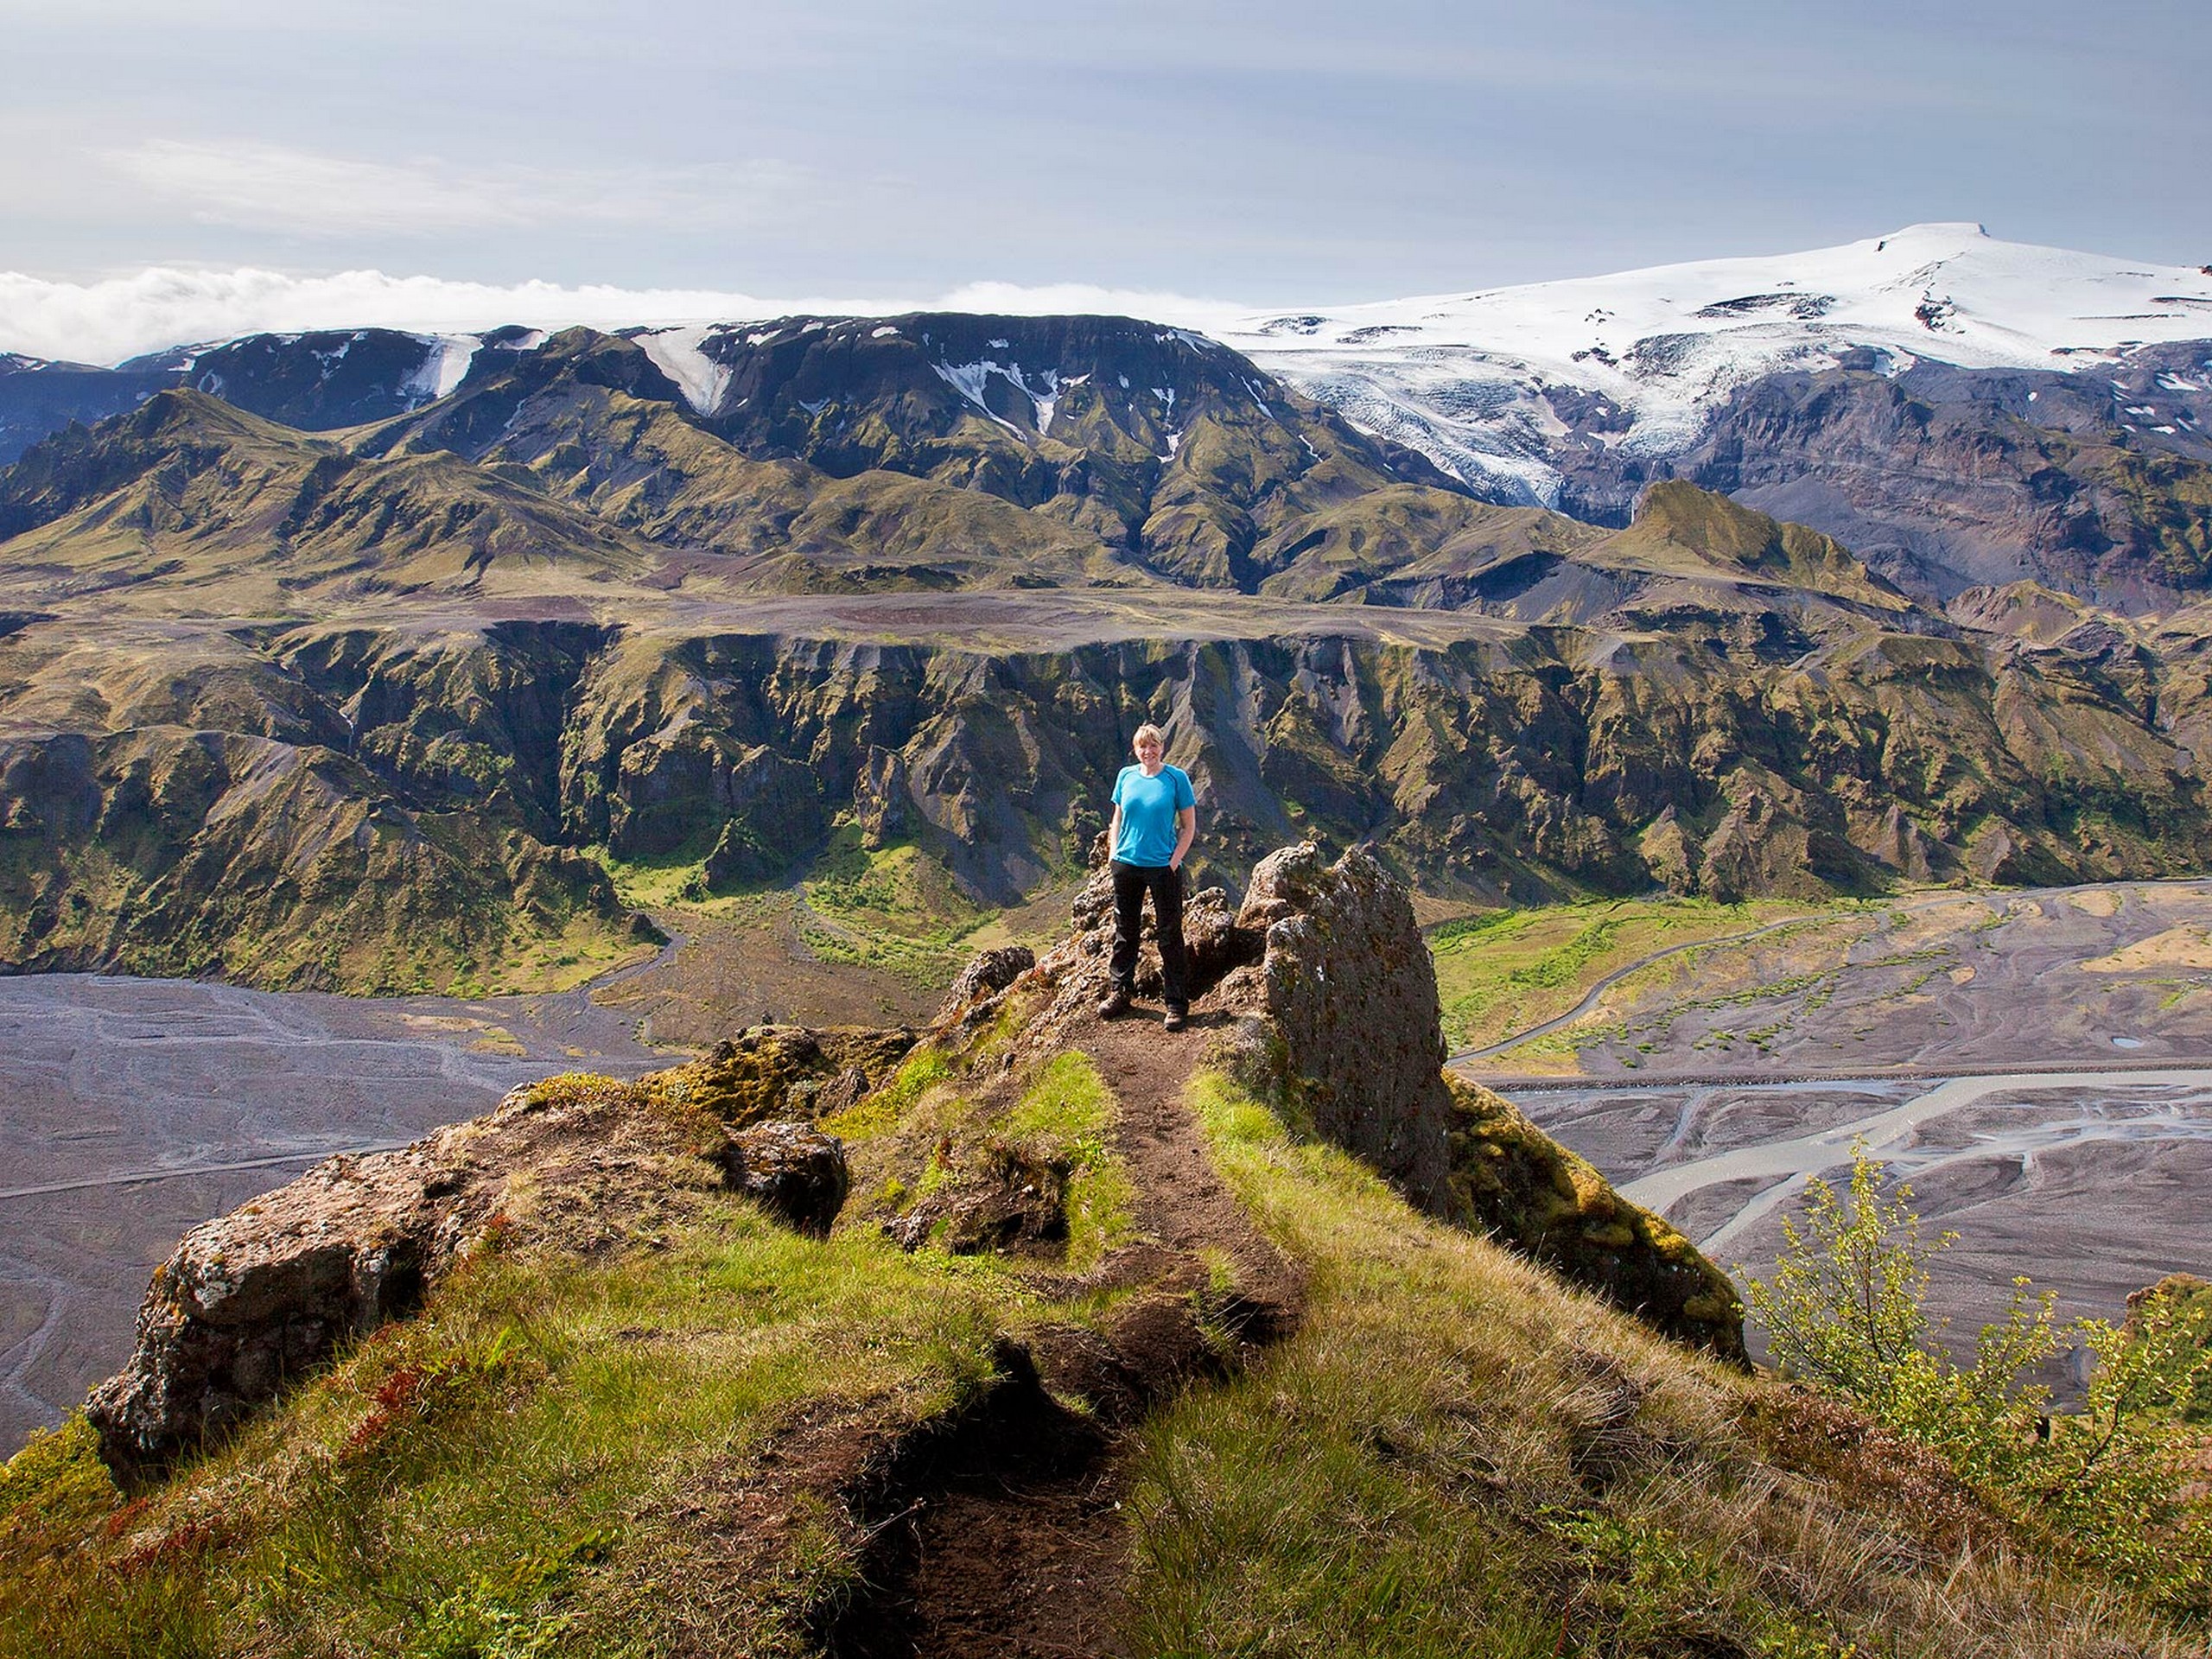 Greta S - Posing in front of the stunning landscape in Iceland